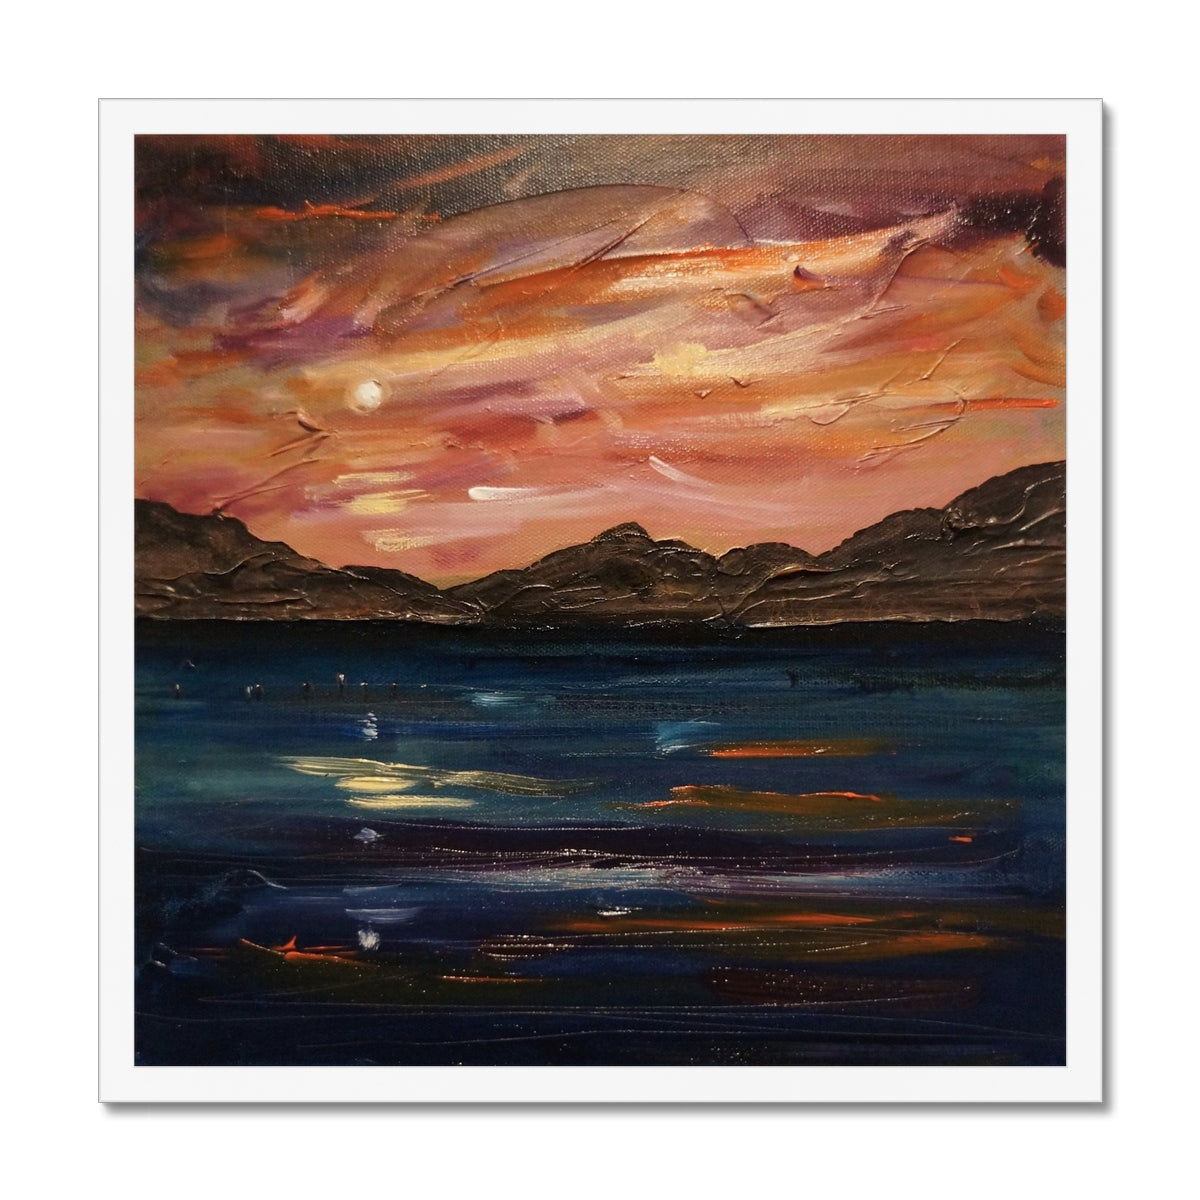 Loch Ness Moonset Painting | Framed Prints From Scotland-Framed Prints-Scottish Lochs & Mountains Art Gallery-20"x20"-White Frame-Paintings, Prints, Homeware, Art Gifts From Scotland By Scottish Artist Kevin Hunter